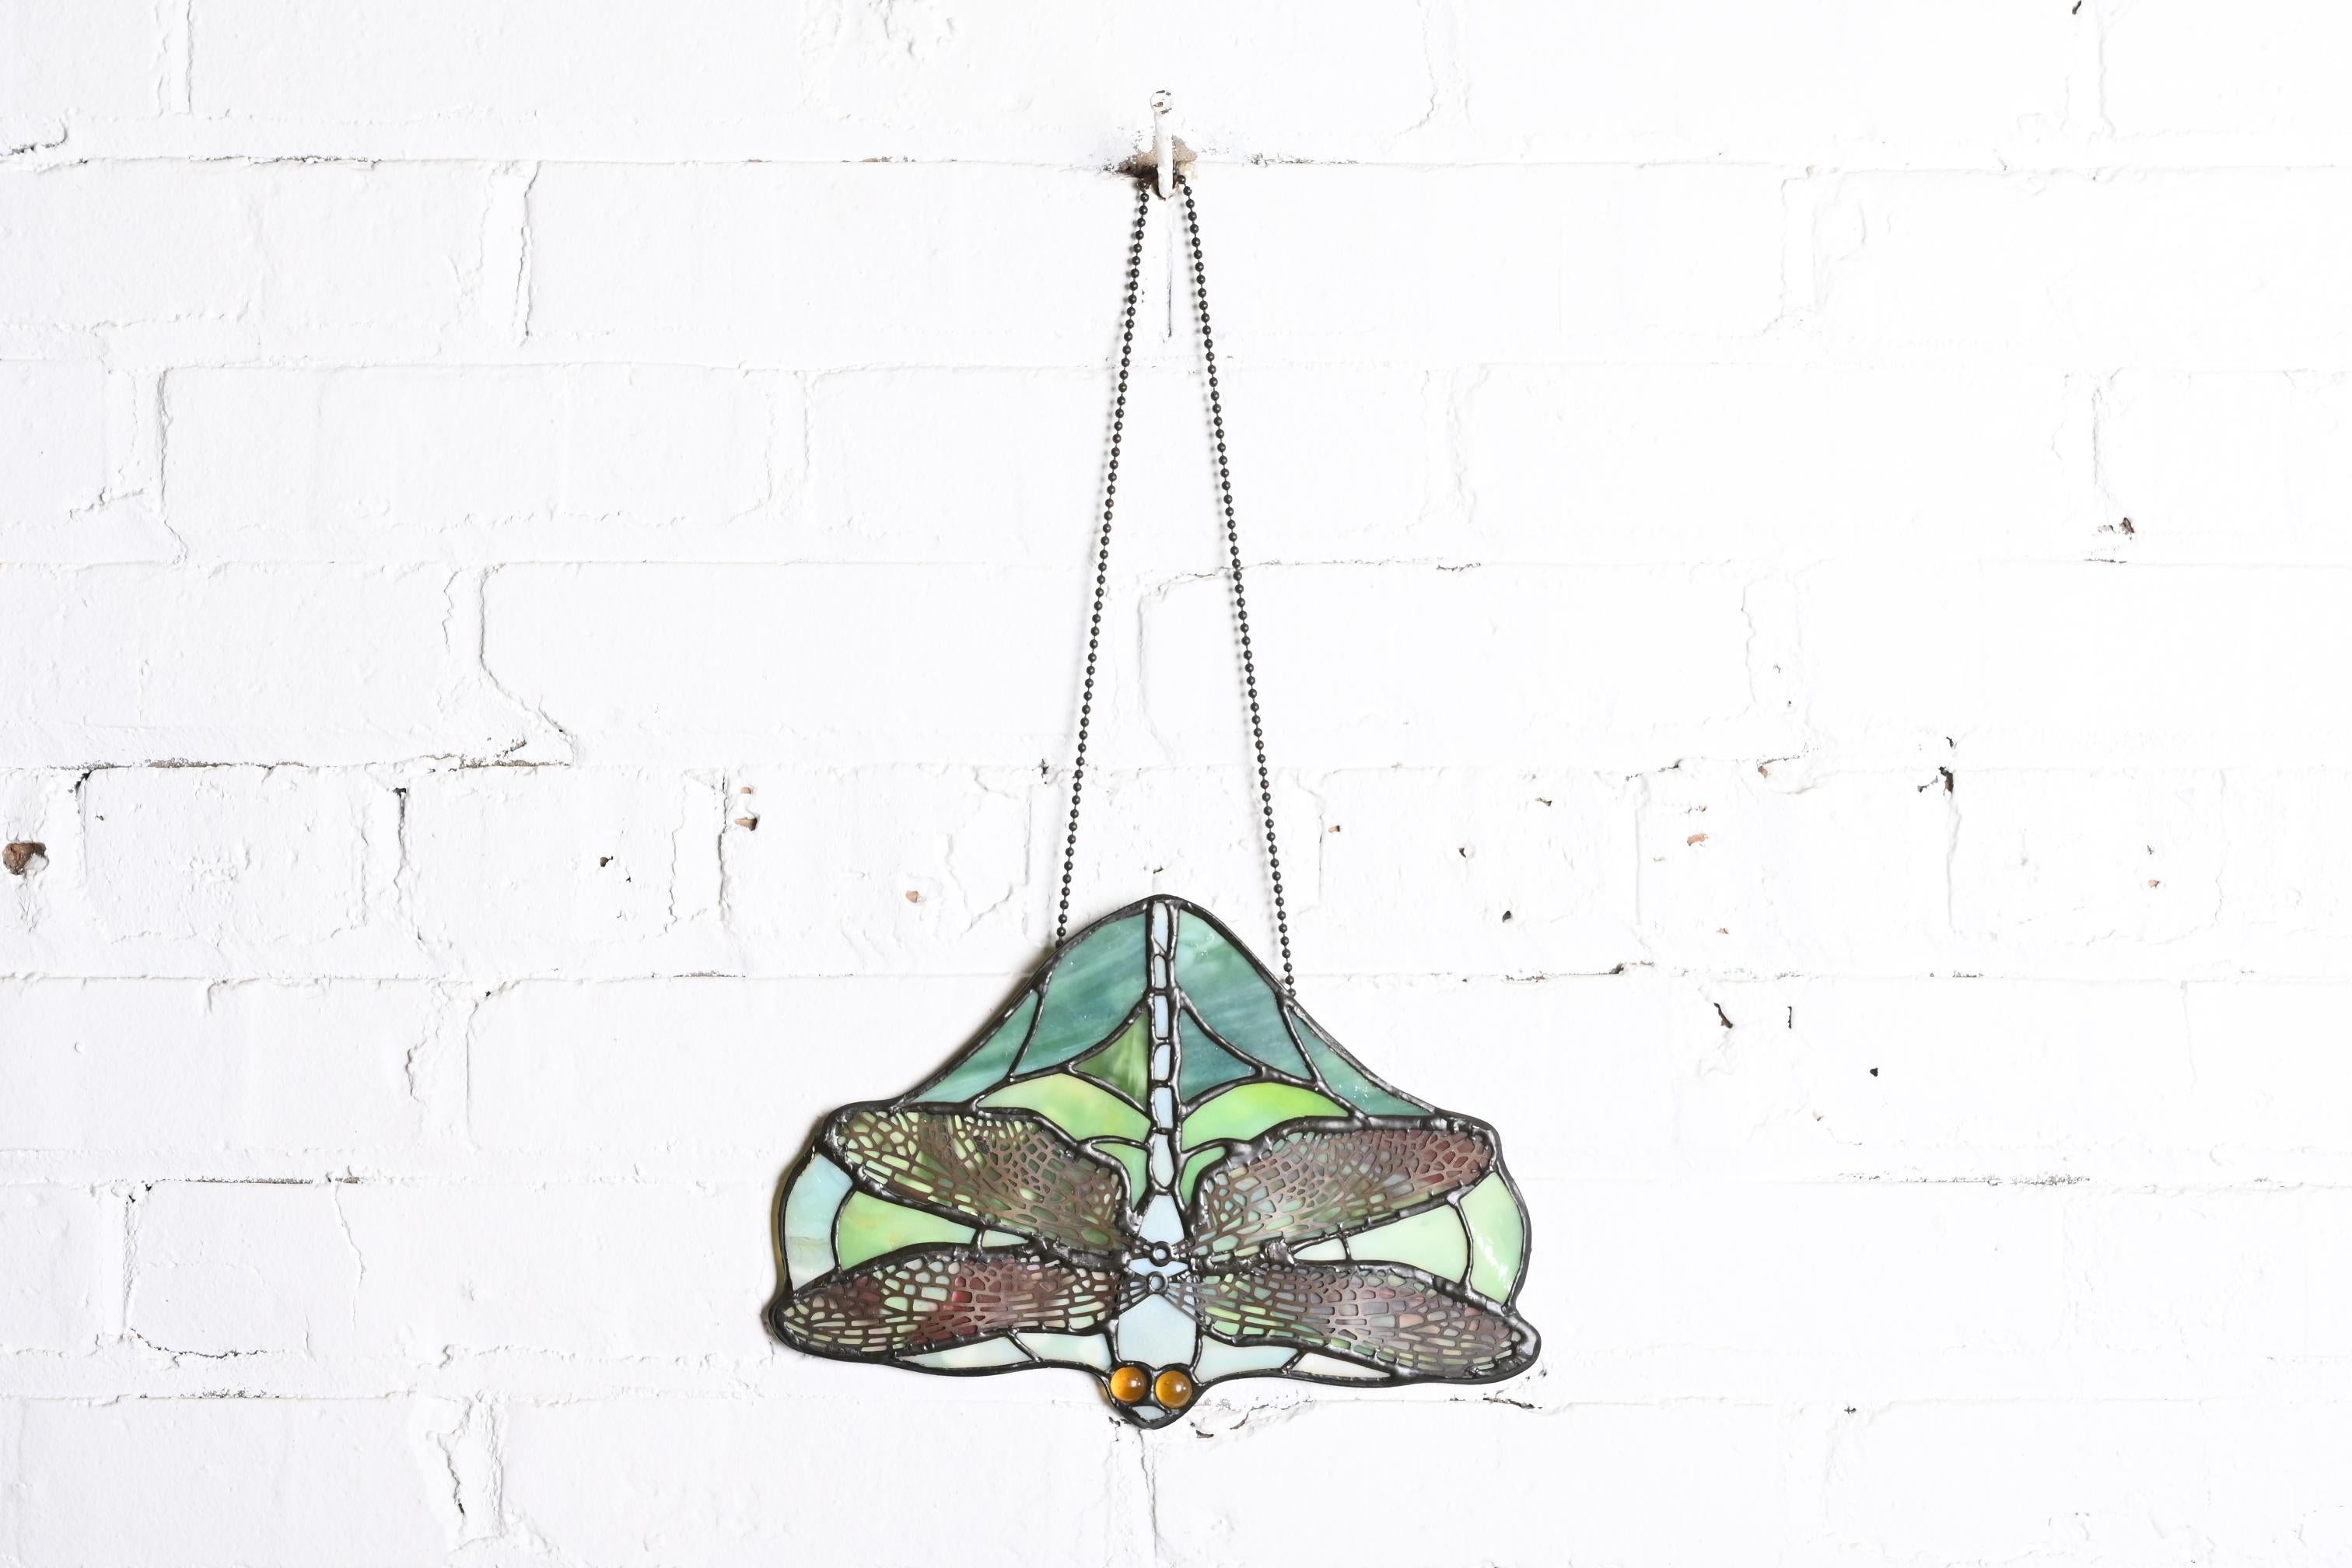 A gorgeous Arts & Crafts style stained glass window hanging, sun catcher, or lamp screen in the form of a dragonfly

In the manner of Tiffany Studios New York

USA, 20th Century

Stained glass, with copper wings and topaz jeweled glass